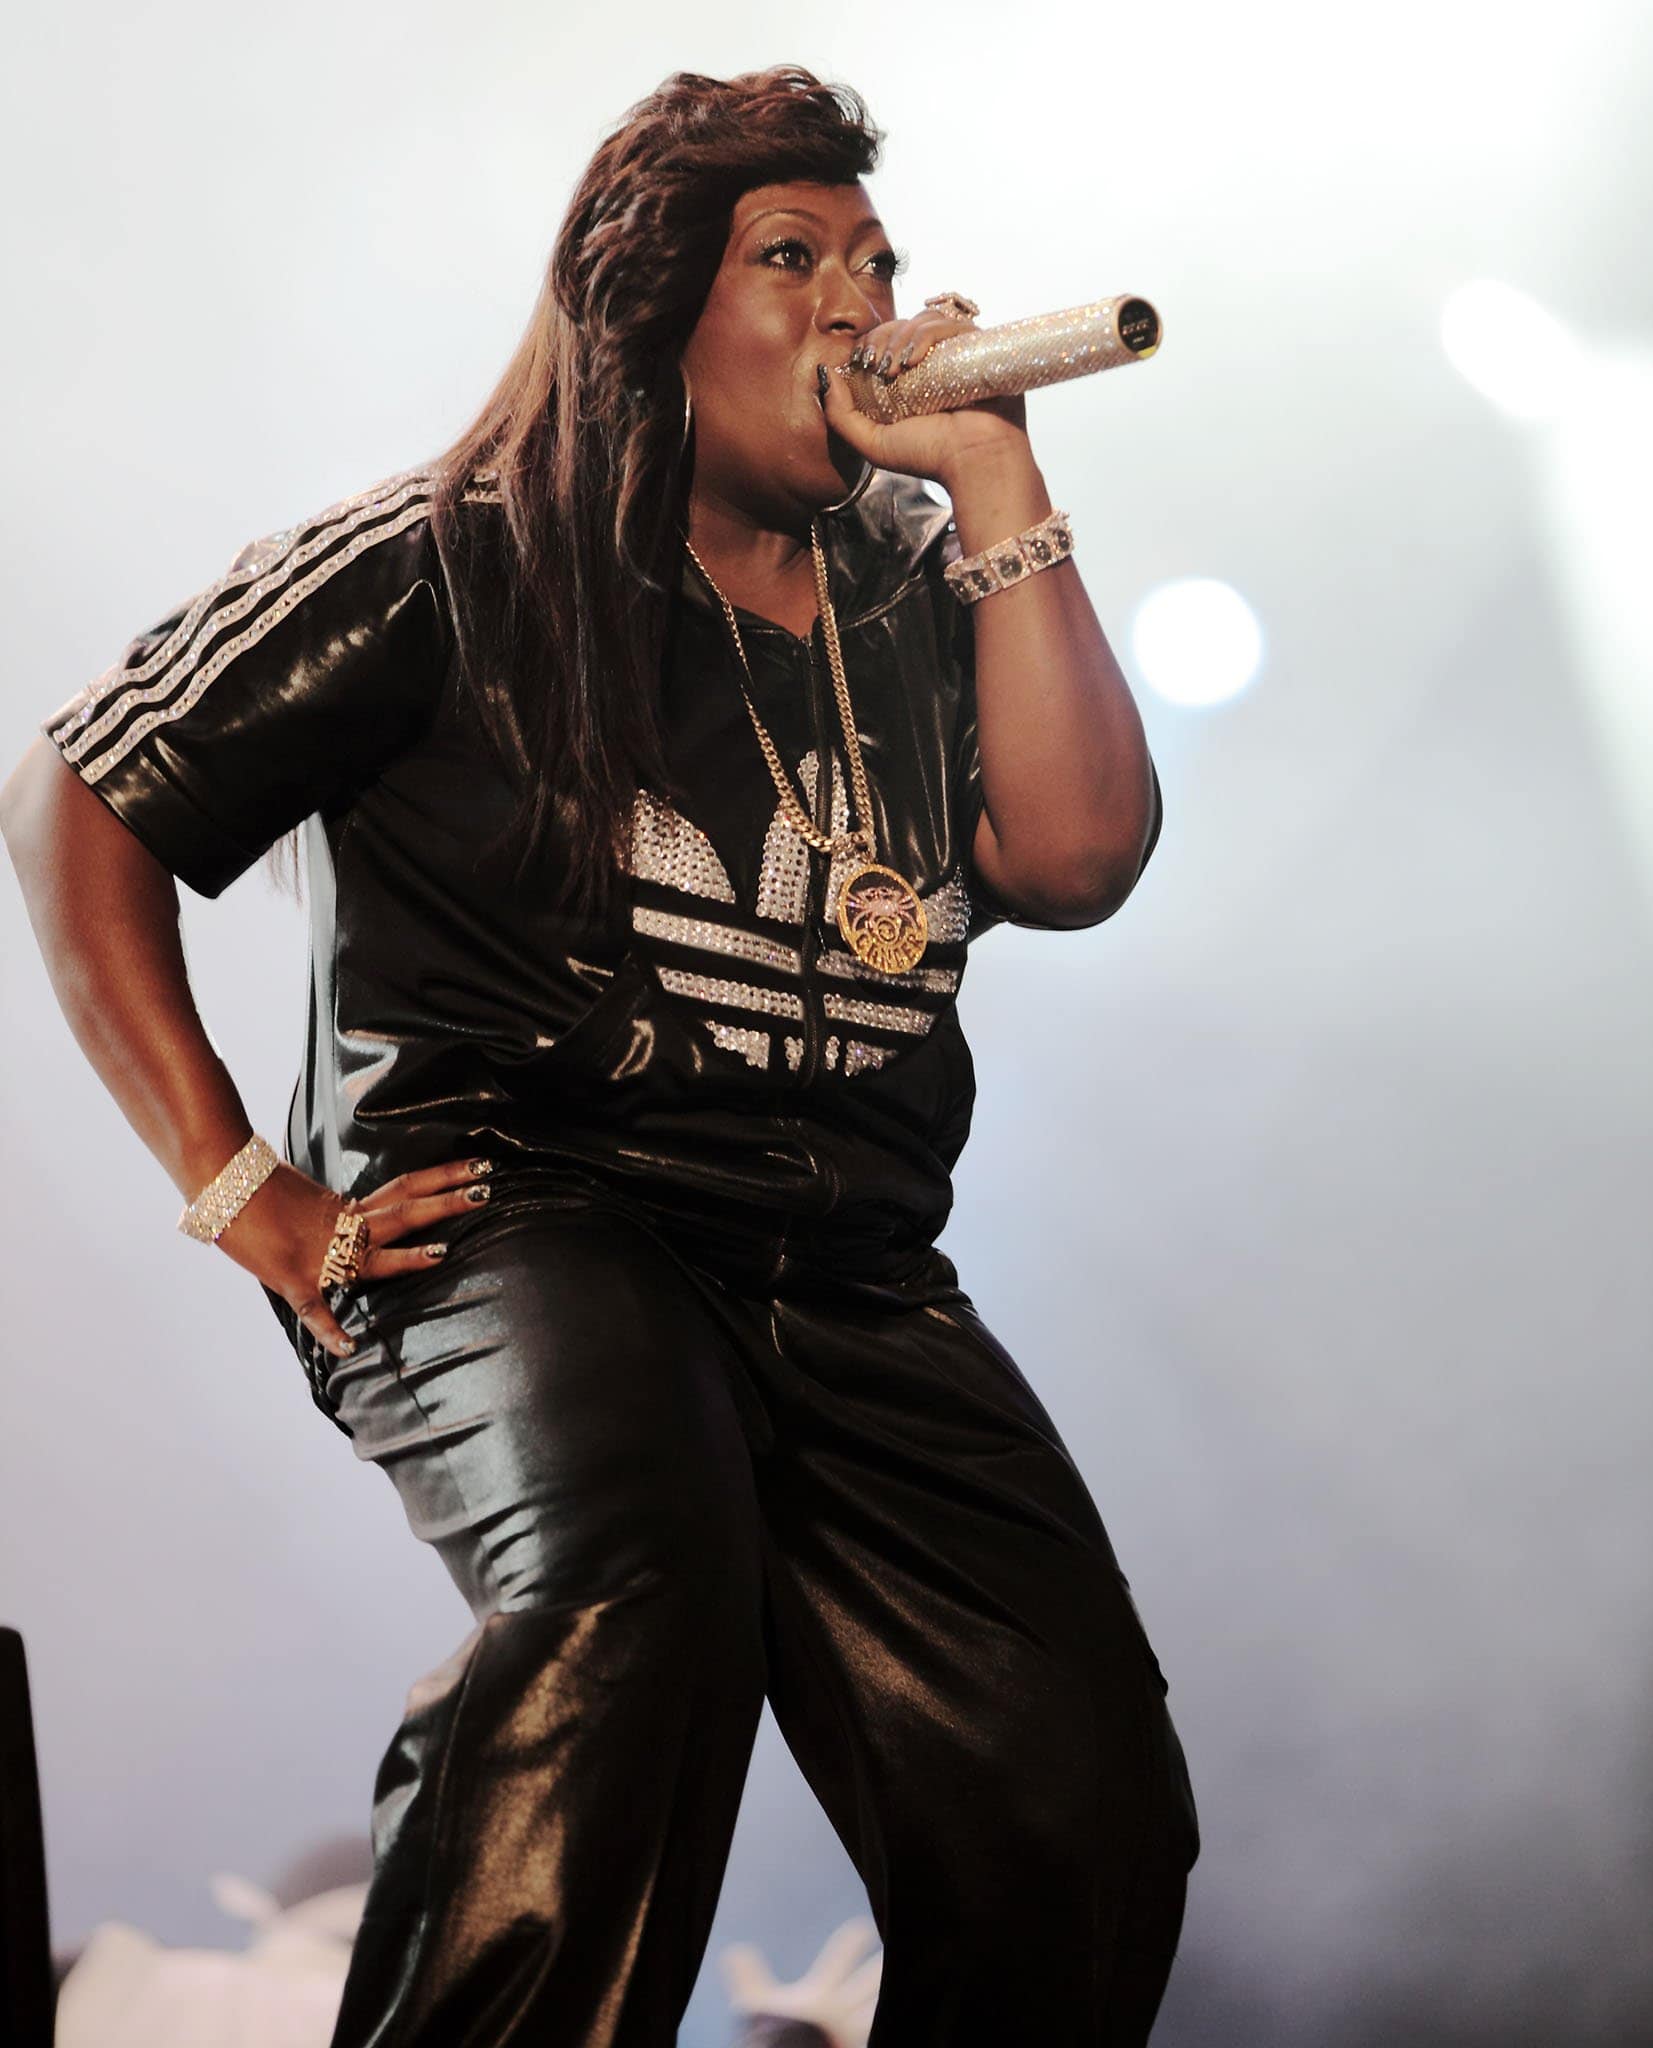 Missy Elliott, in 1997, achieved significant success with the release of her debut solo album "Supa Dupa Fly," which attained platinum certification, and her remarkable achievements in the music industry have contributed to an estimated net worth of approximately $50 million